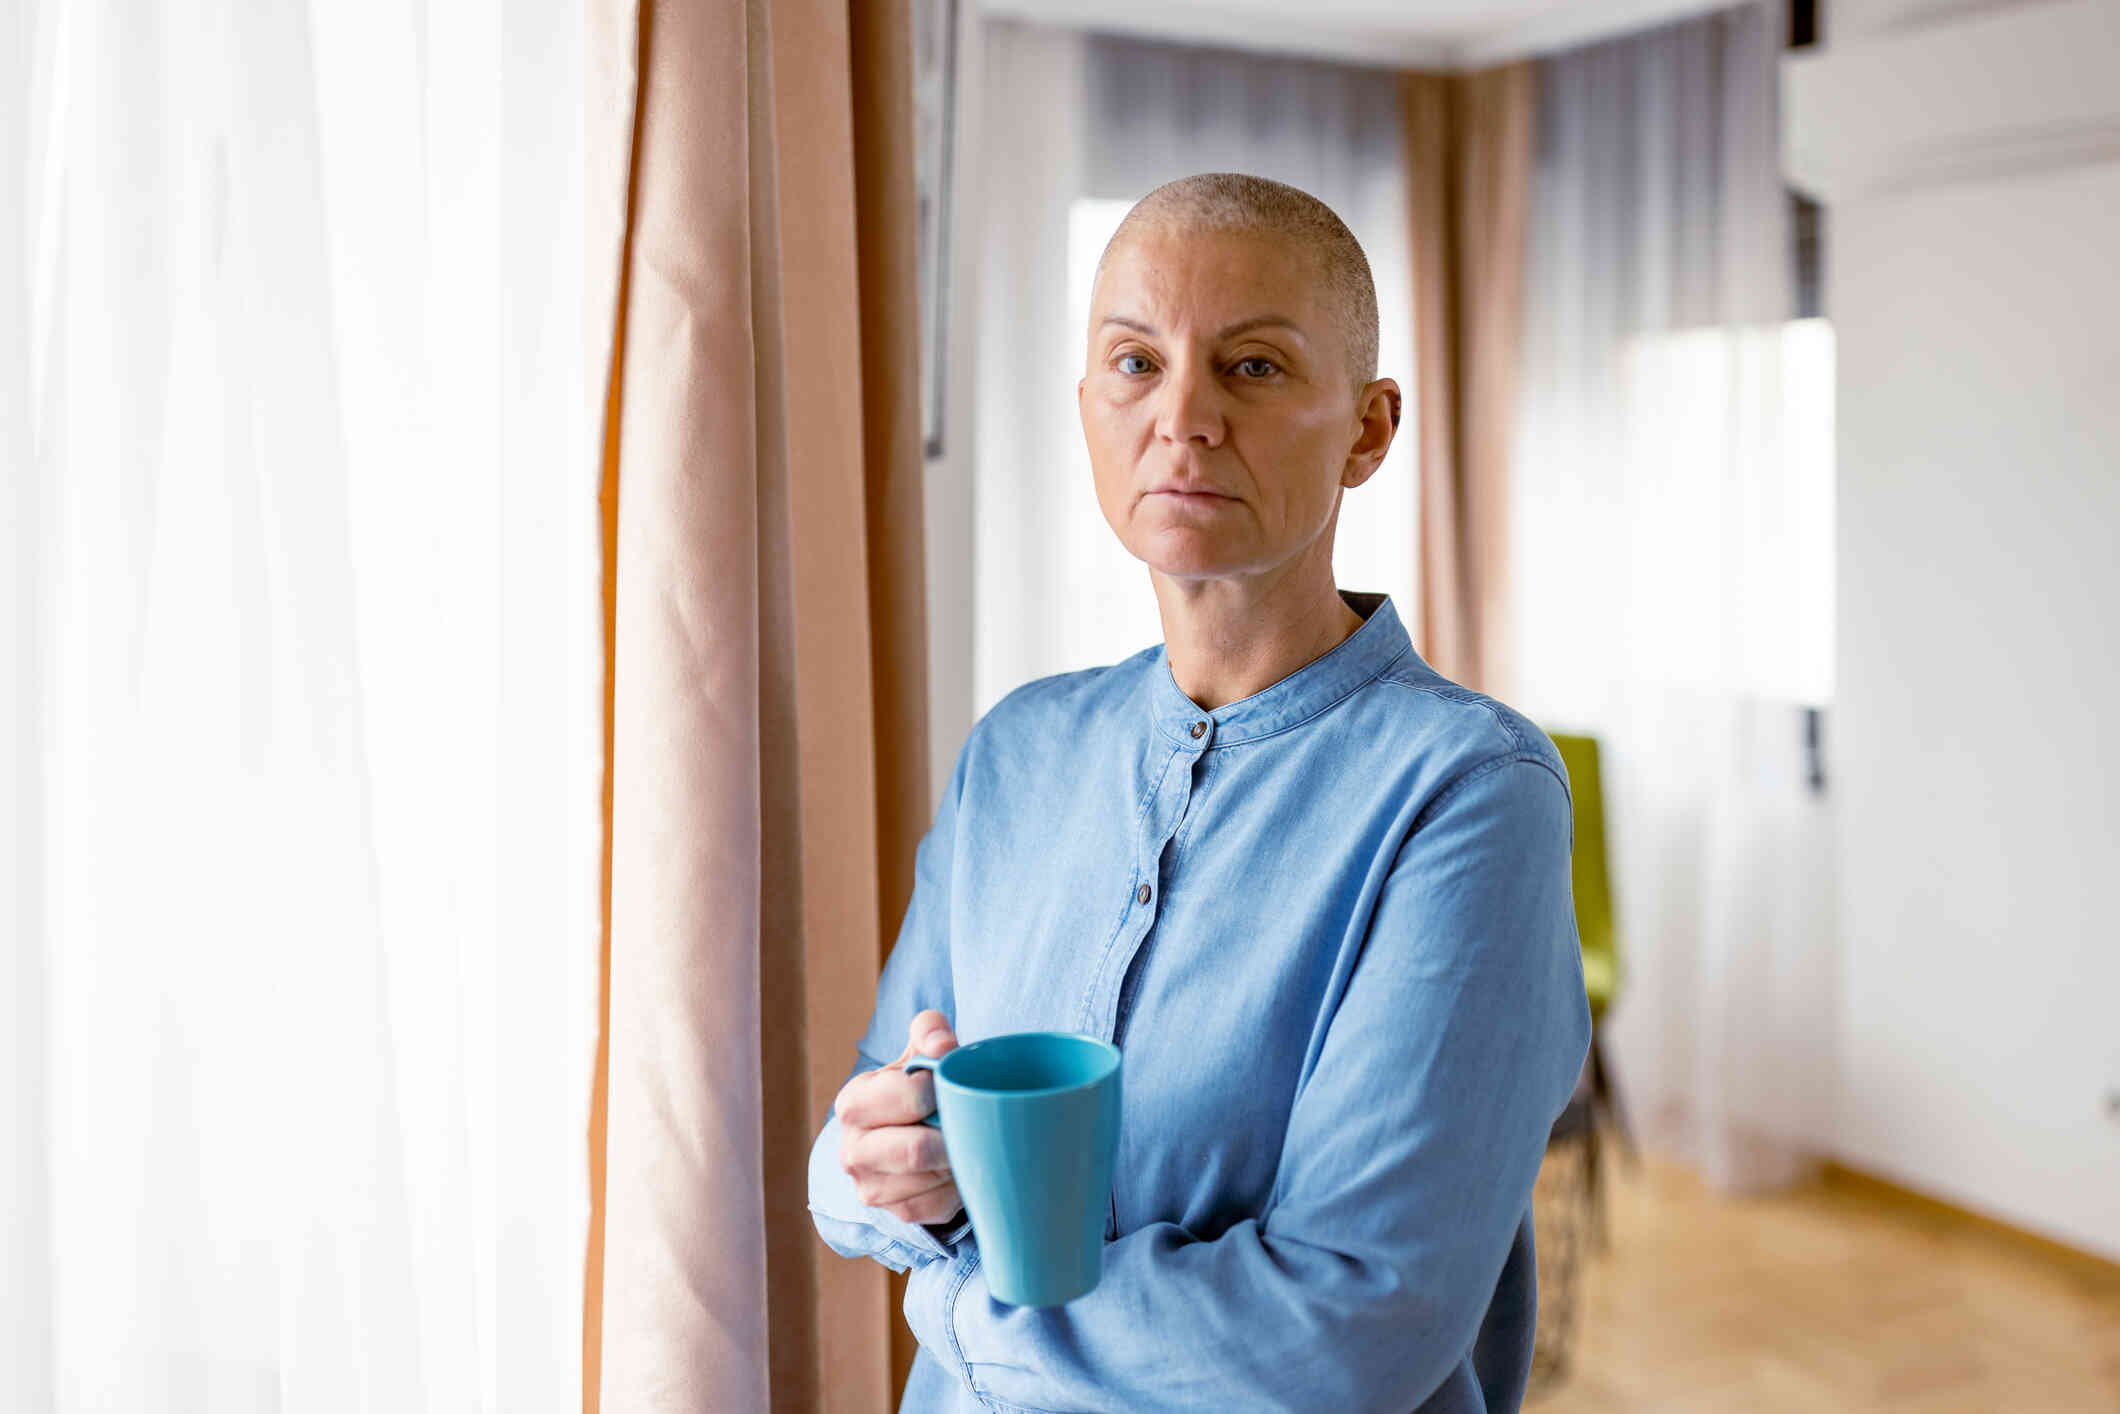 A woman in a button down shirt stands in her home while holding a mug of coffee and looking at the camera with a serious expression.